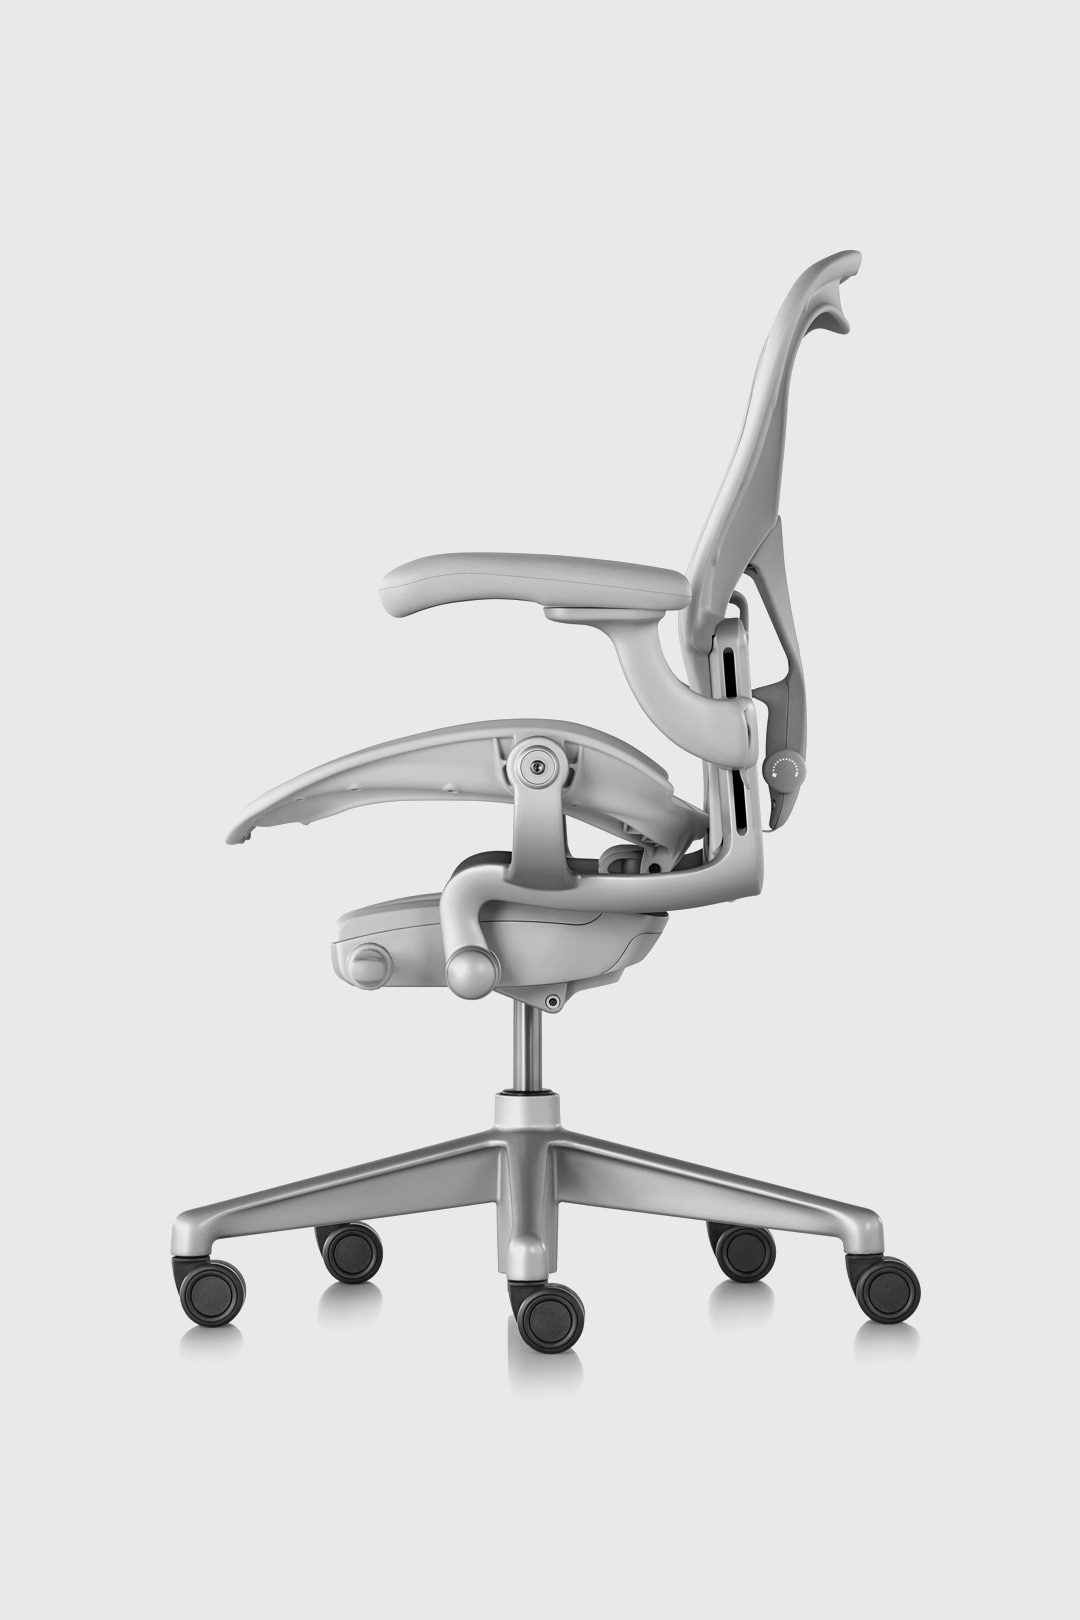 Complete side view of the new Aeron Chair in Mineral finish in front of a white background